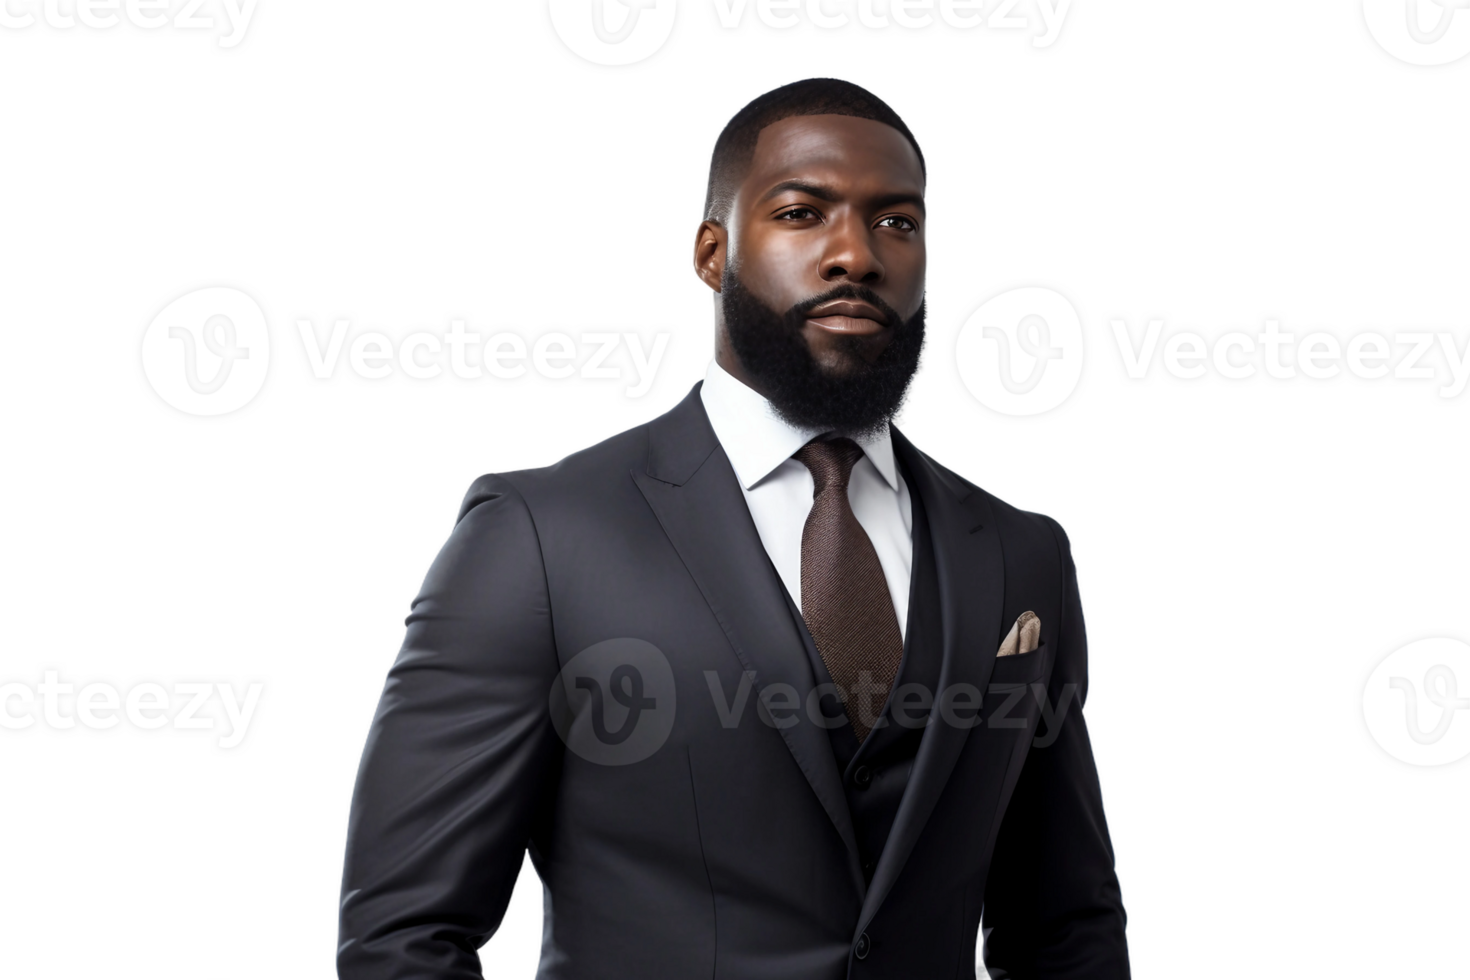 AI generated Black Man in Business Suit for a Meeting Isolated on Transparent Background. png